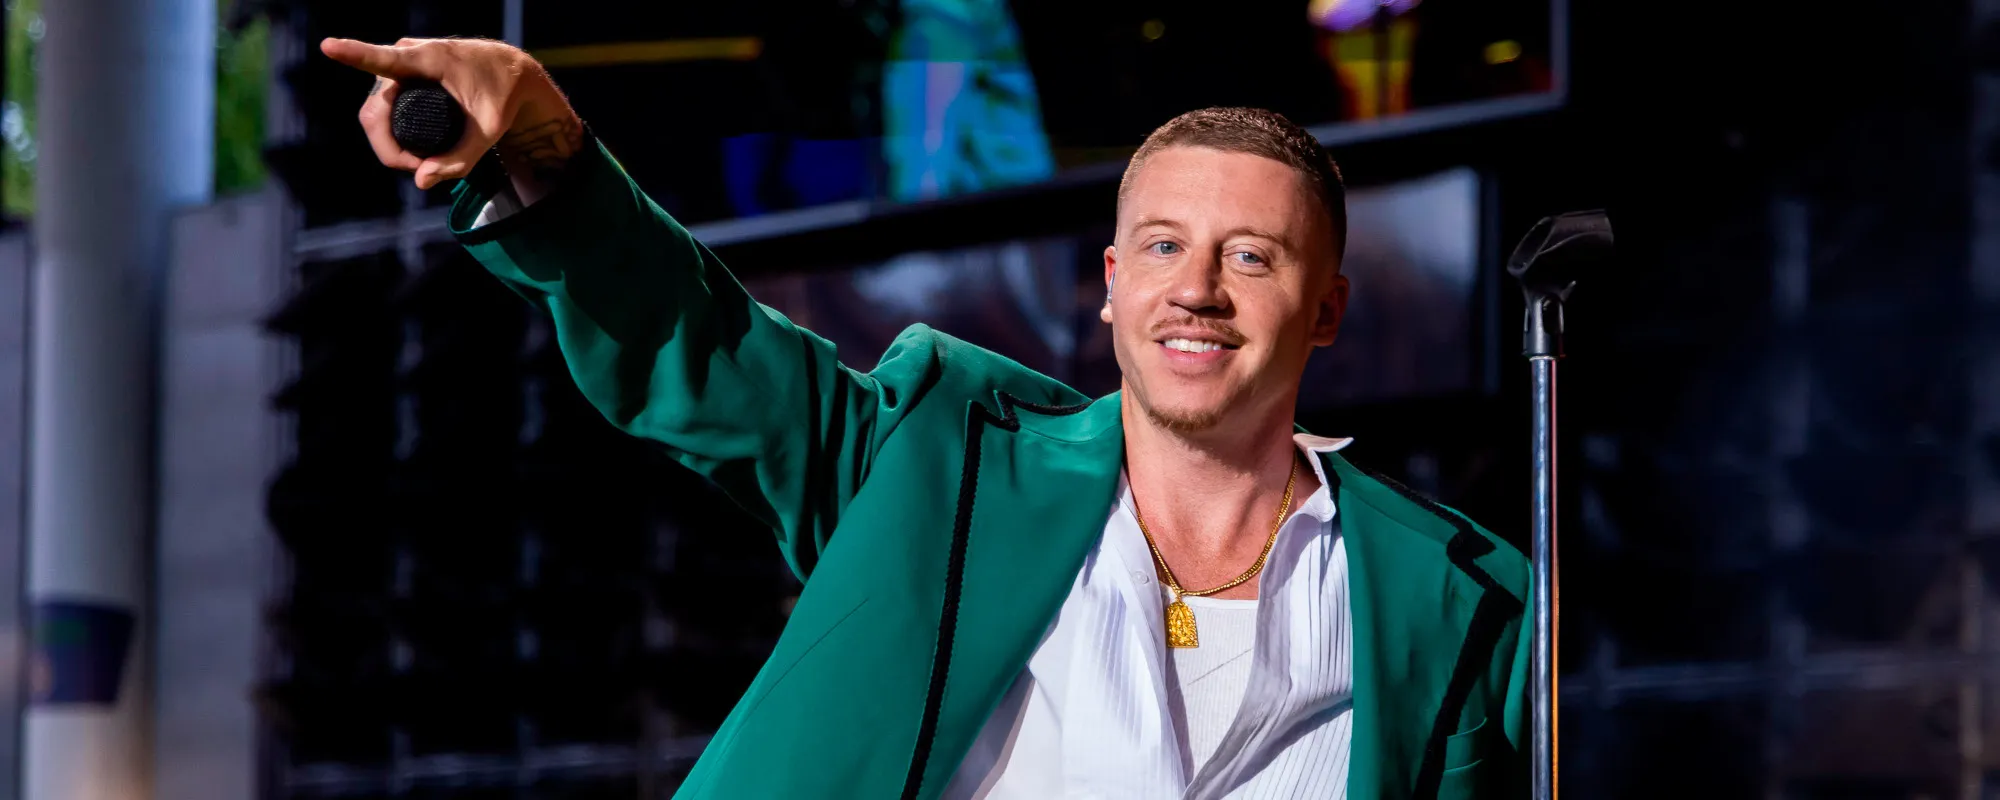 Behind the Meaning of the Professorial Band Name Macklemore